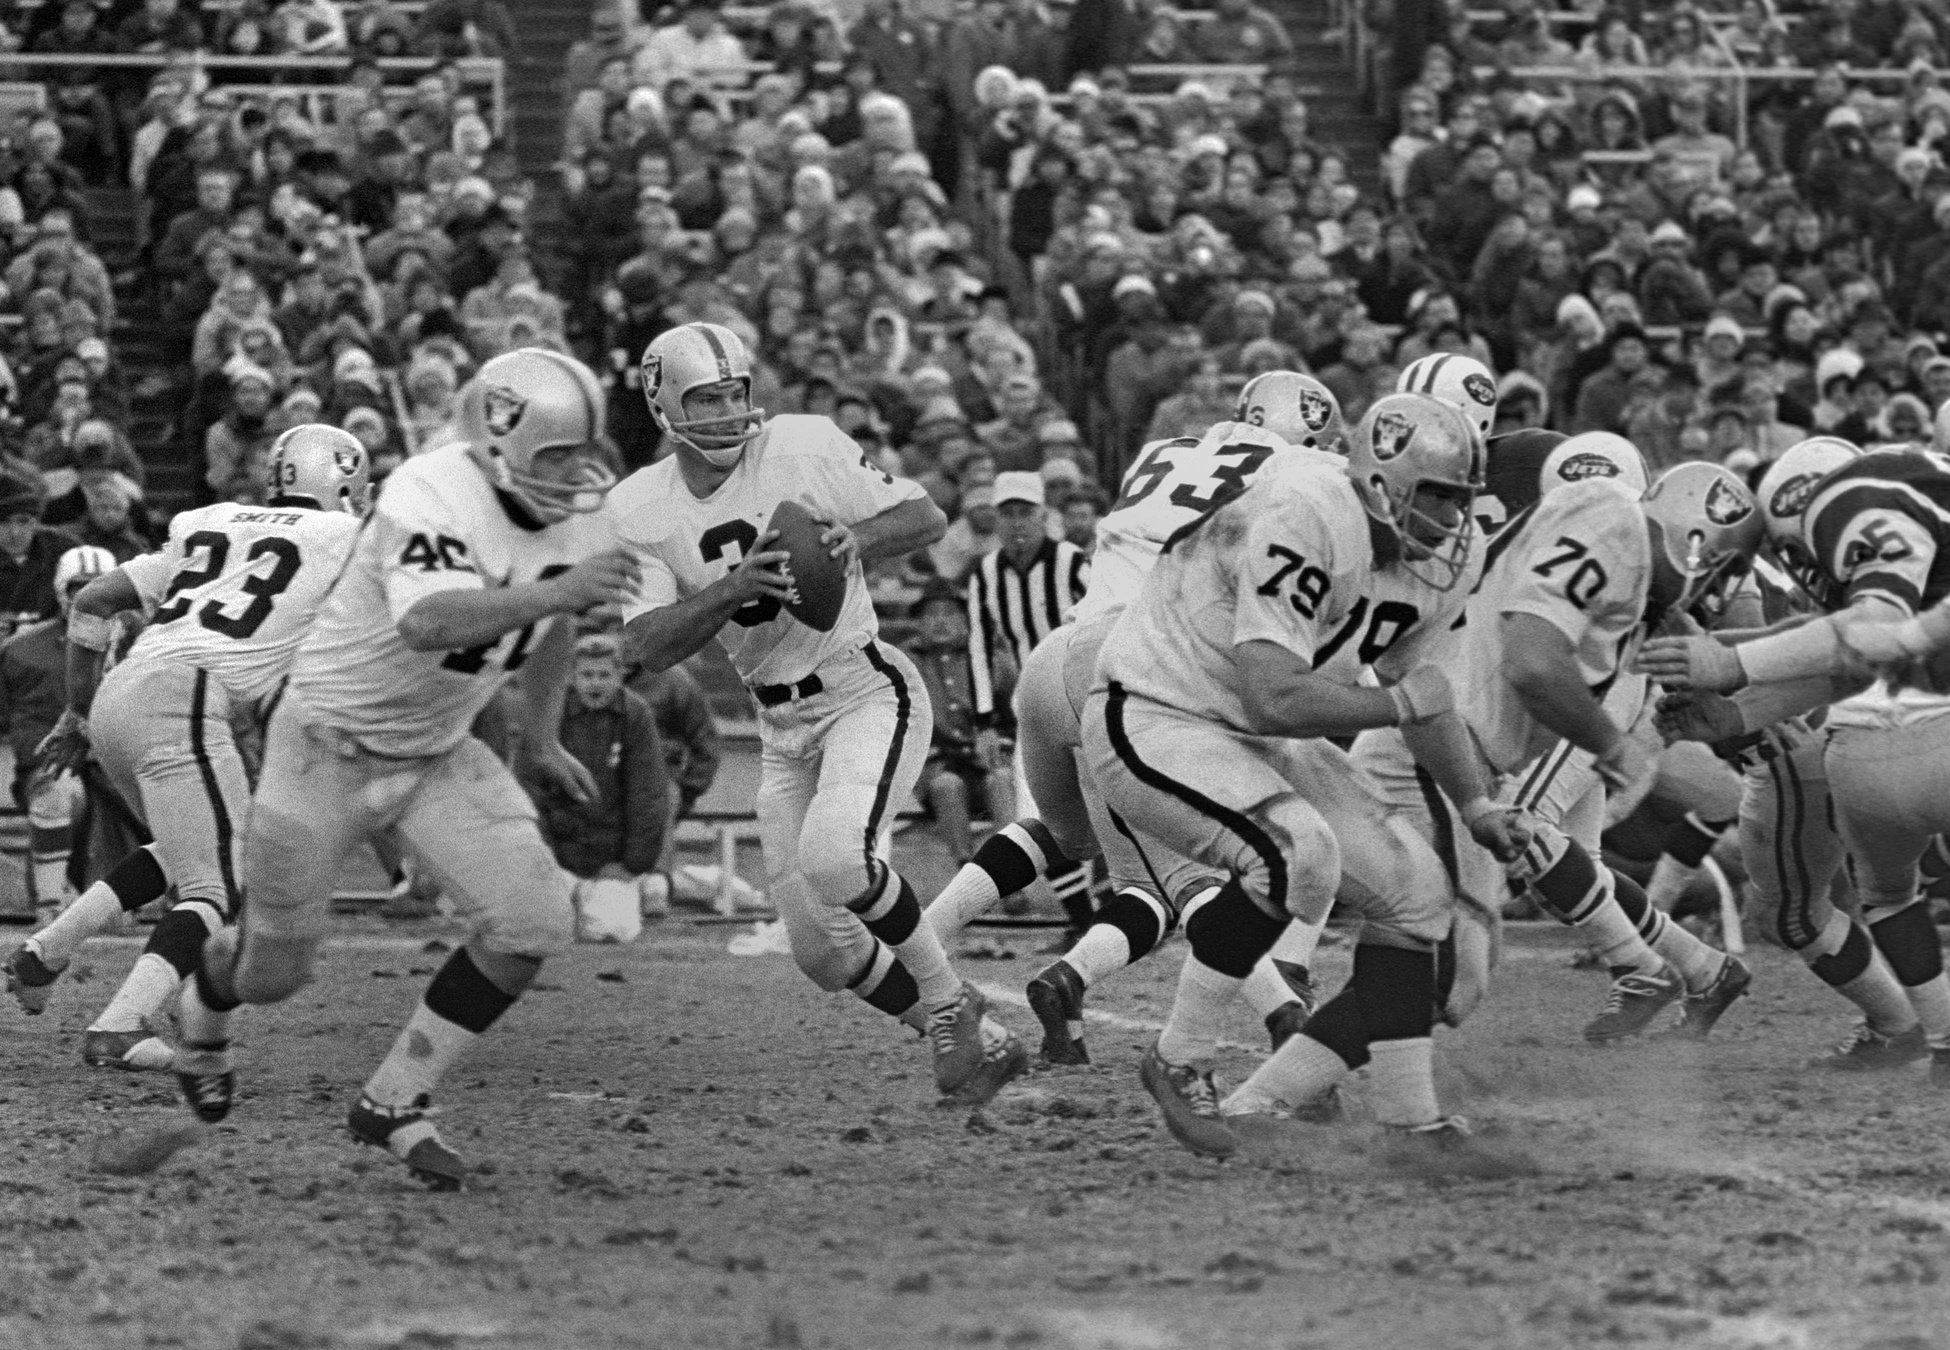 Oakland Raiders quarterback Daryle Lamonica (3) drops back to pass behind tackle Harry Schuh (79) against the New York Jets at Shea Stadium.